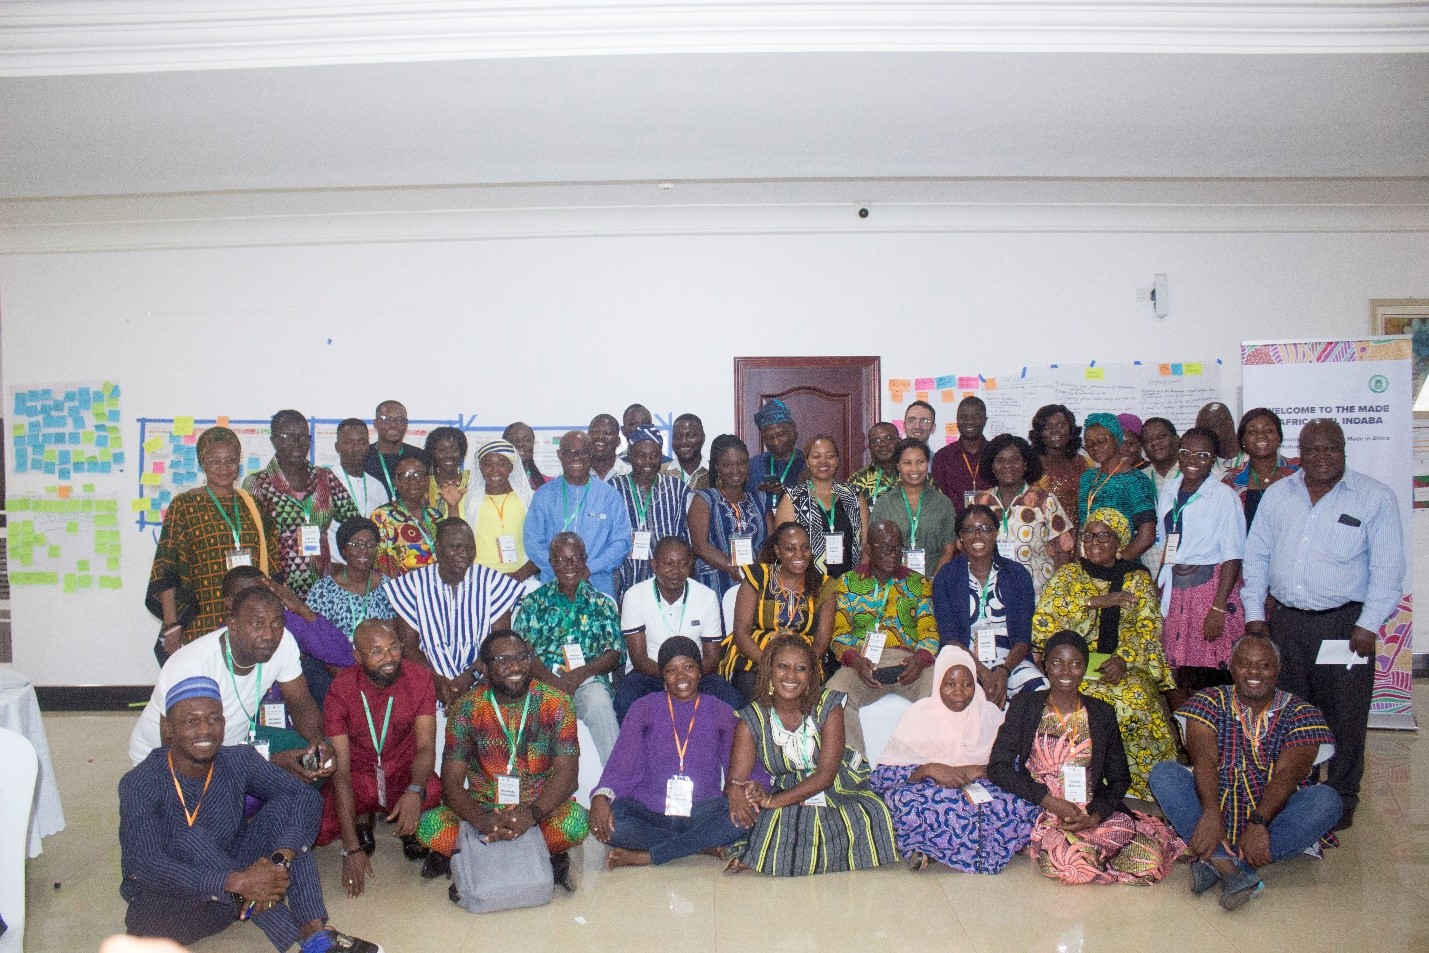 UDS Workshop on Decolonizing Development in Africa Enters Day Two with Vibrant Cultural Display and Intellectual Exchange on Developmental Approaches